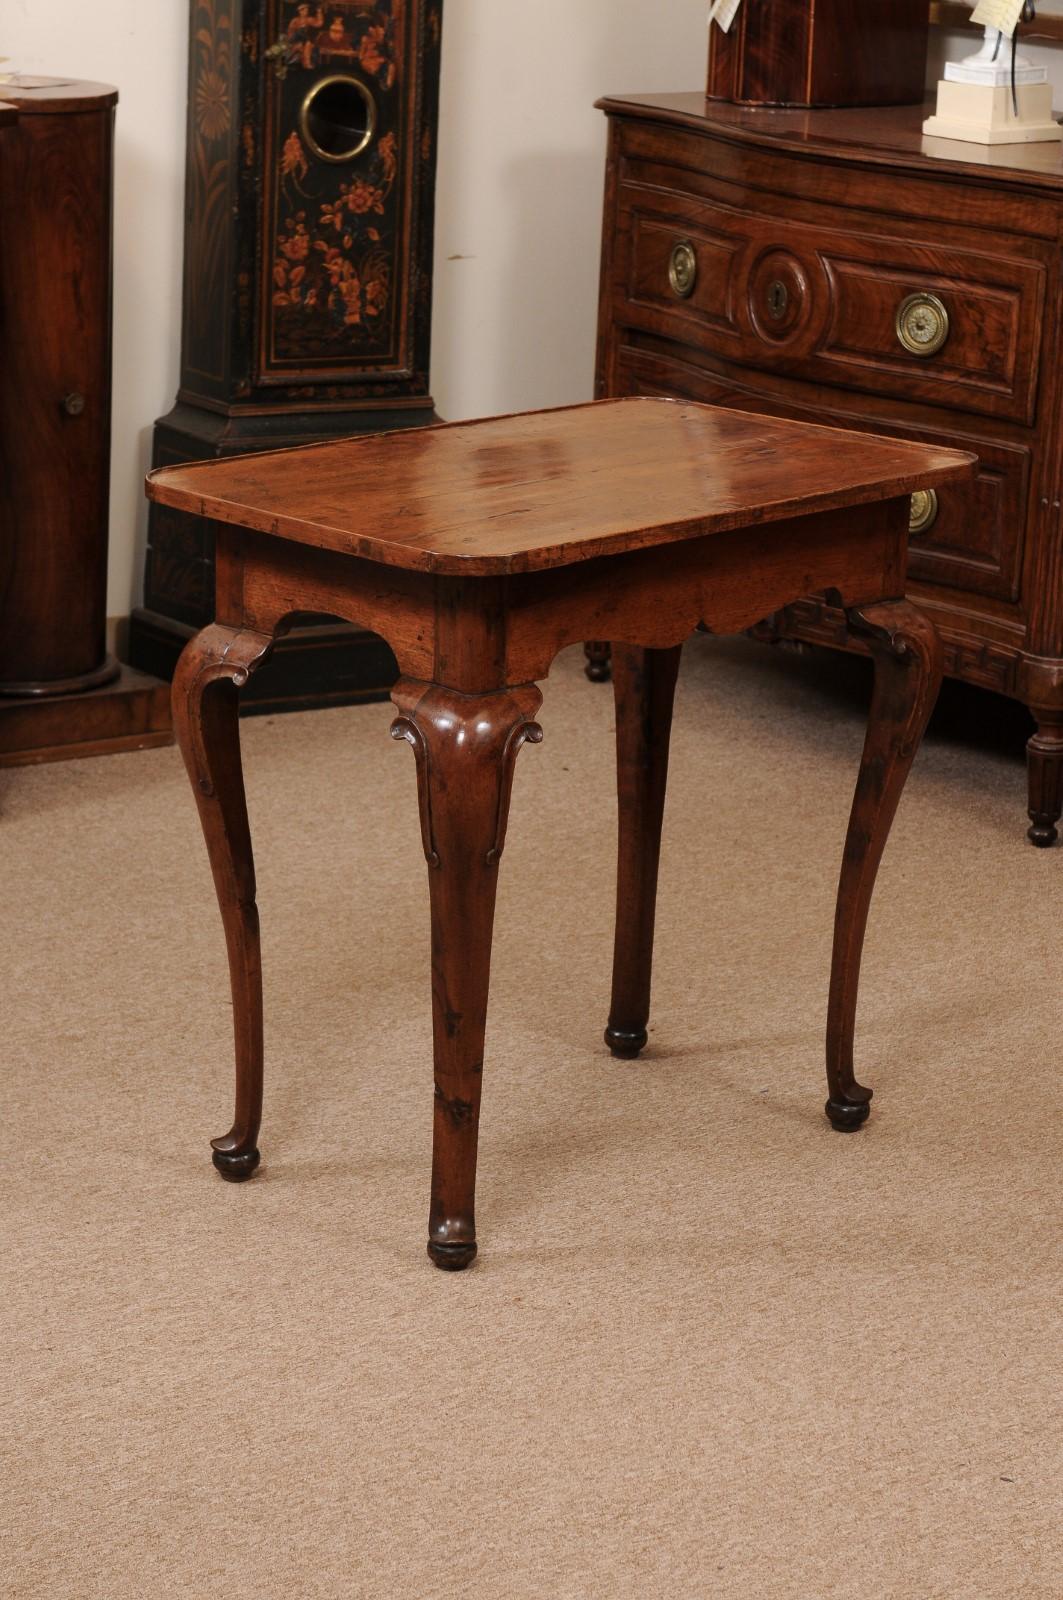 Early 18th Century Italian Walnut Side Table with Tray Top, Drawer, Cabriole Leg For Sale 5